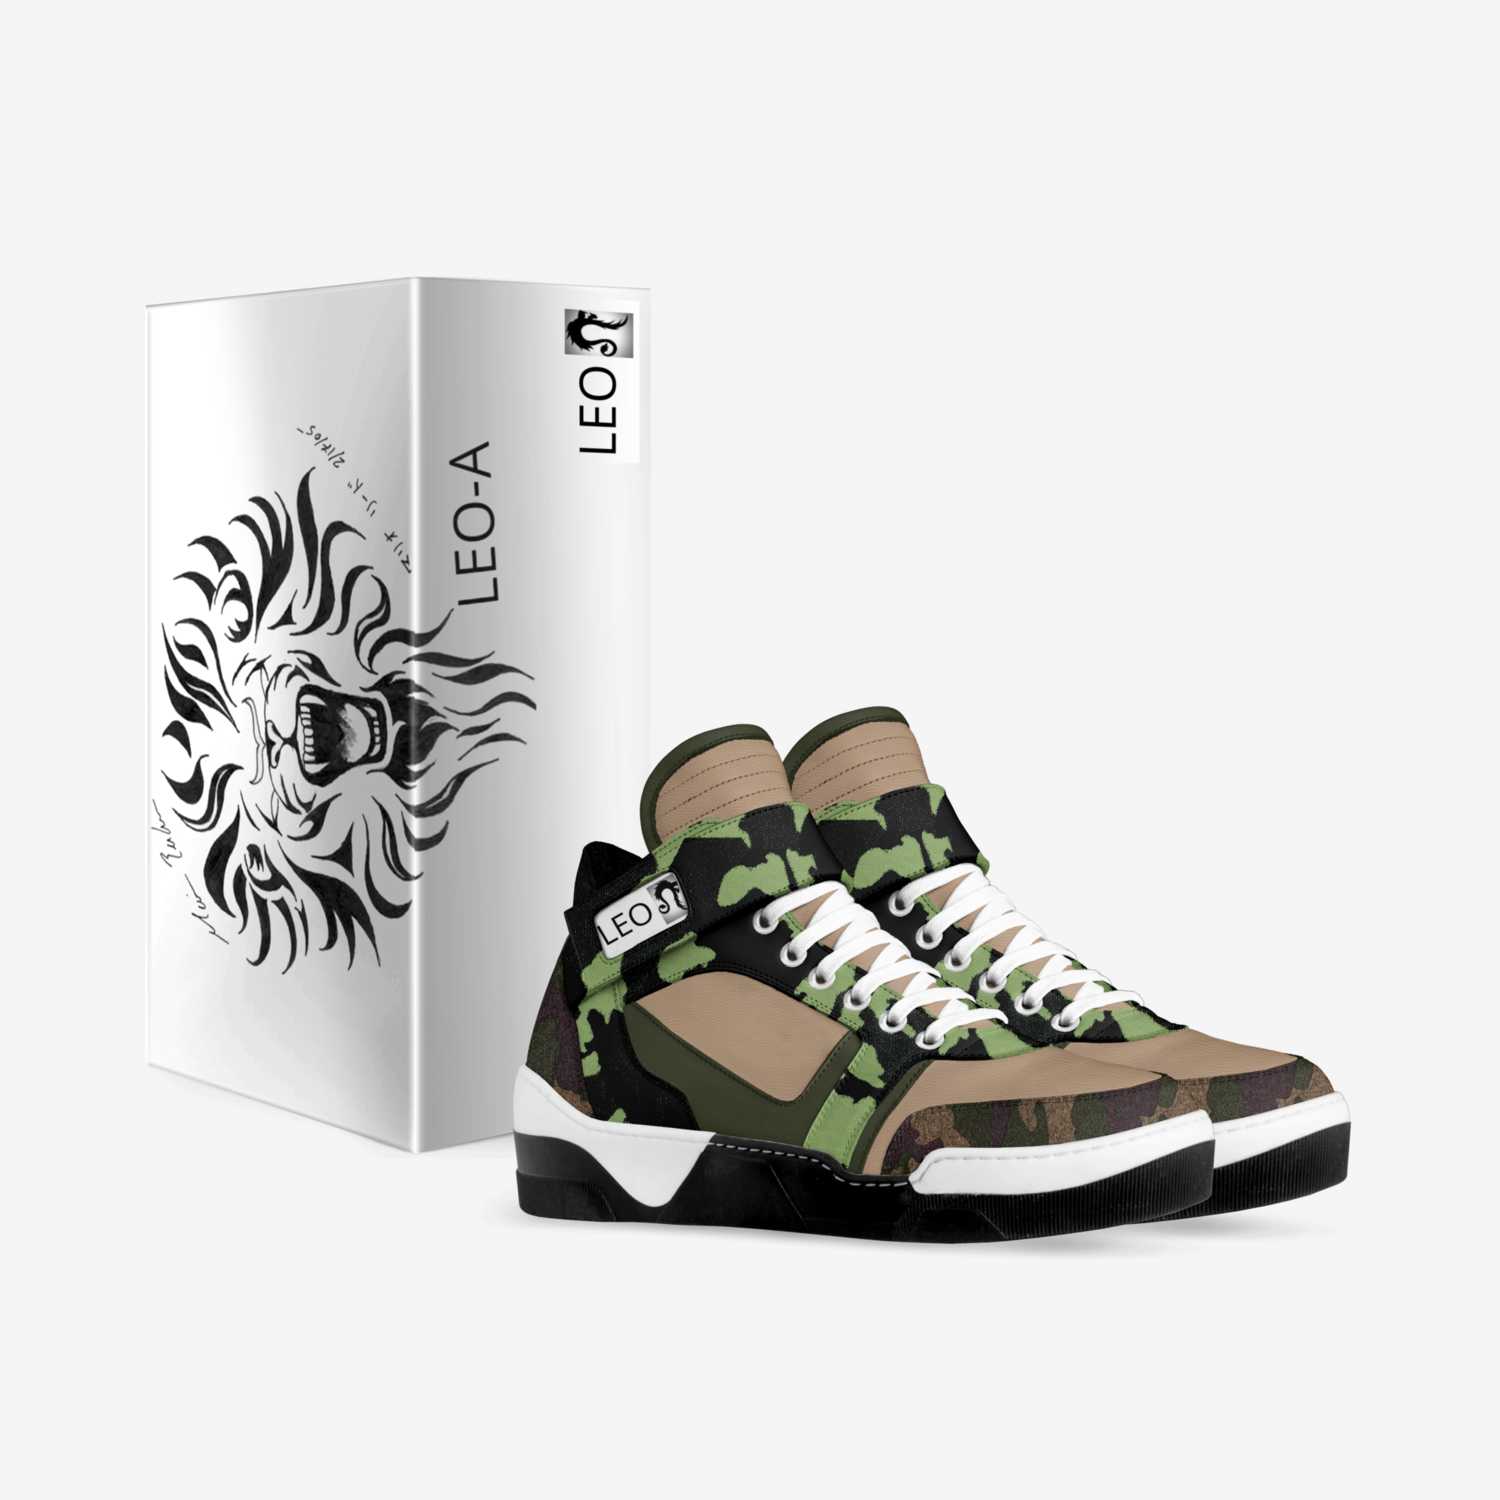 LEO-A  custom made in Italy shoes by Dexter Austin | Box view